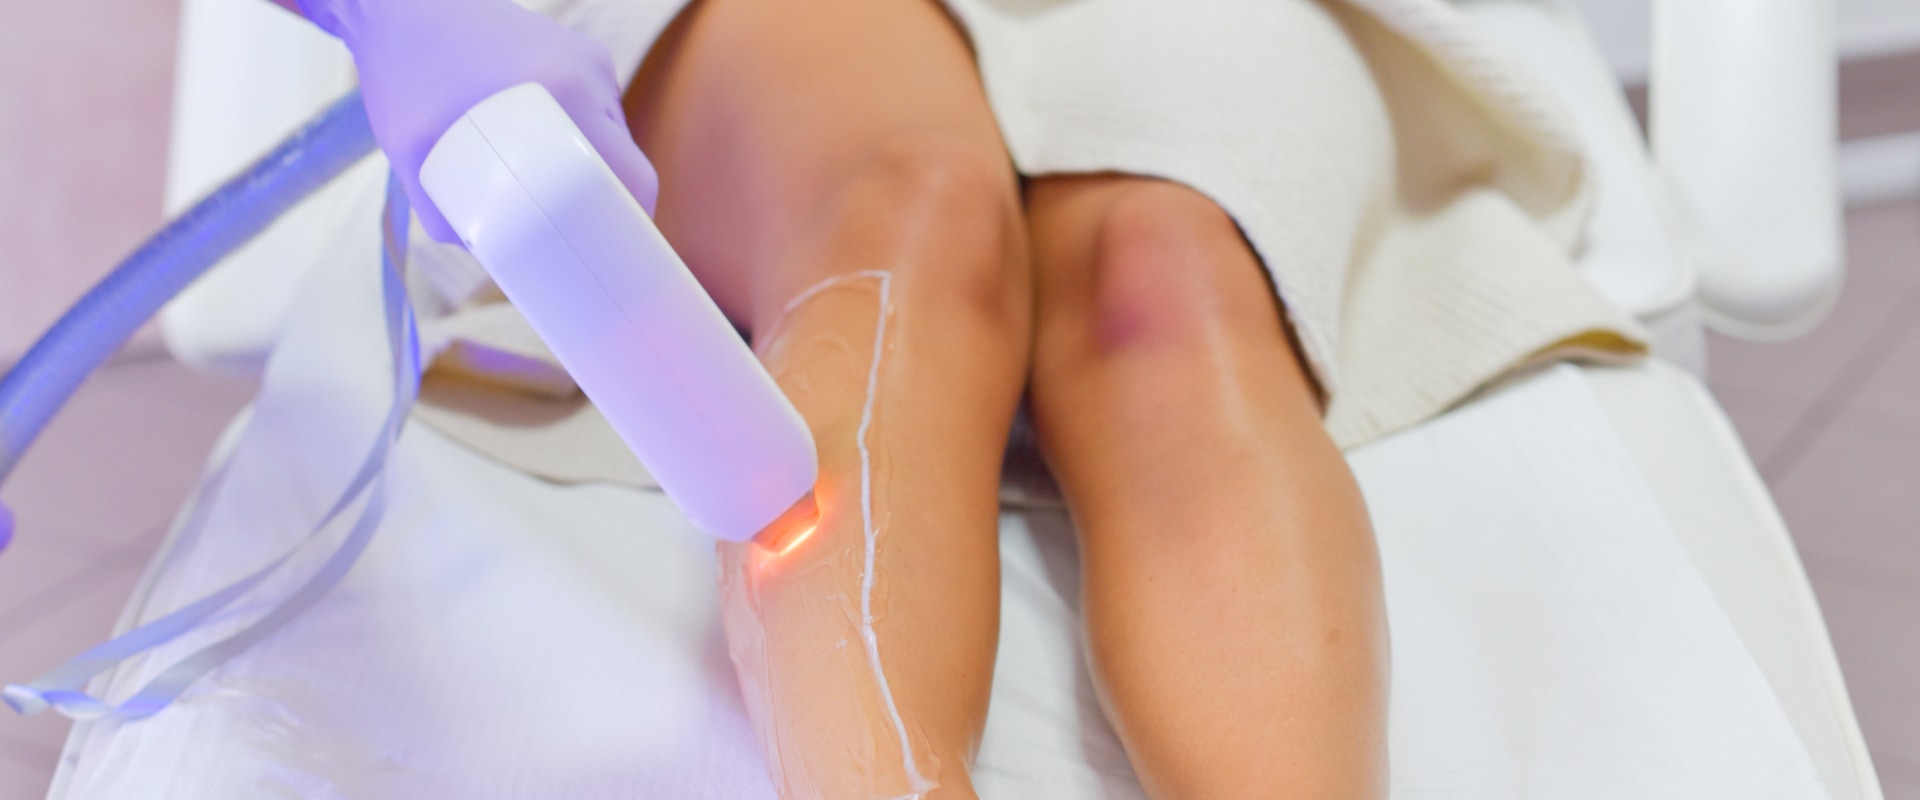 What are the Results of Laser Hair Removal After 3 Sessions?